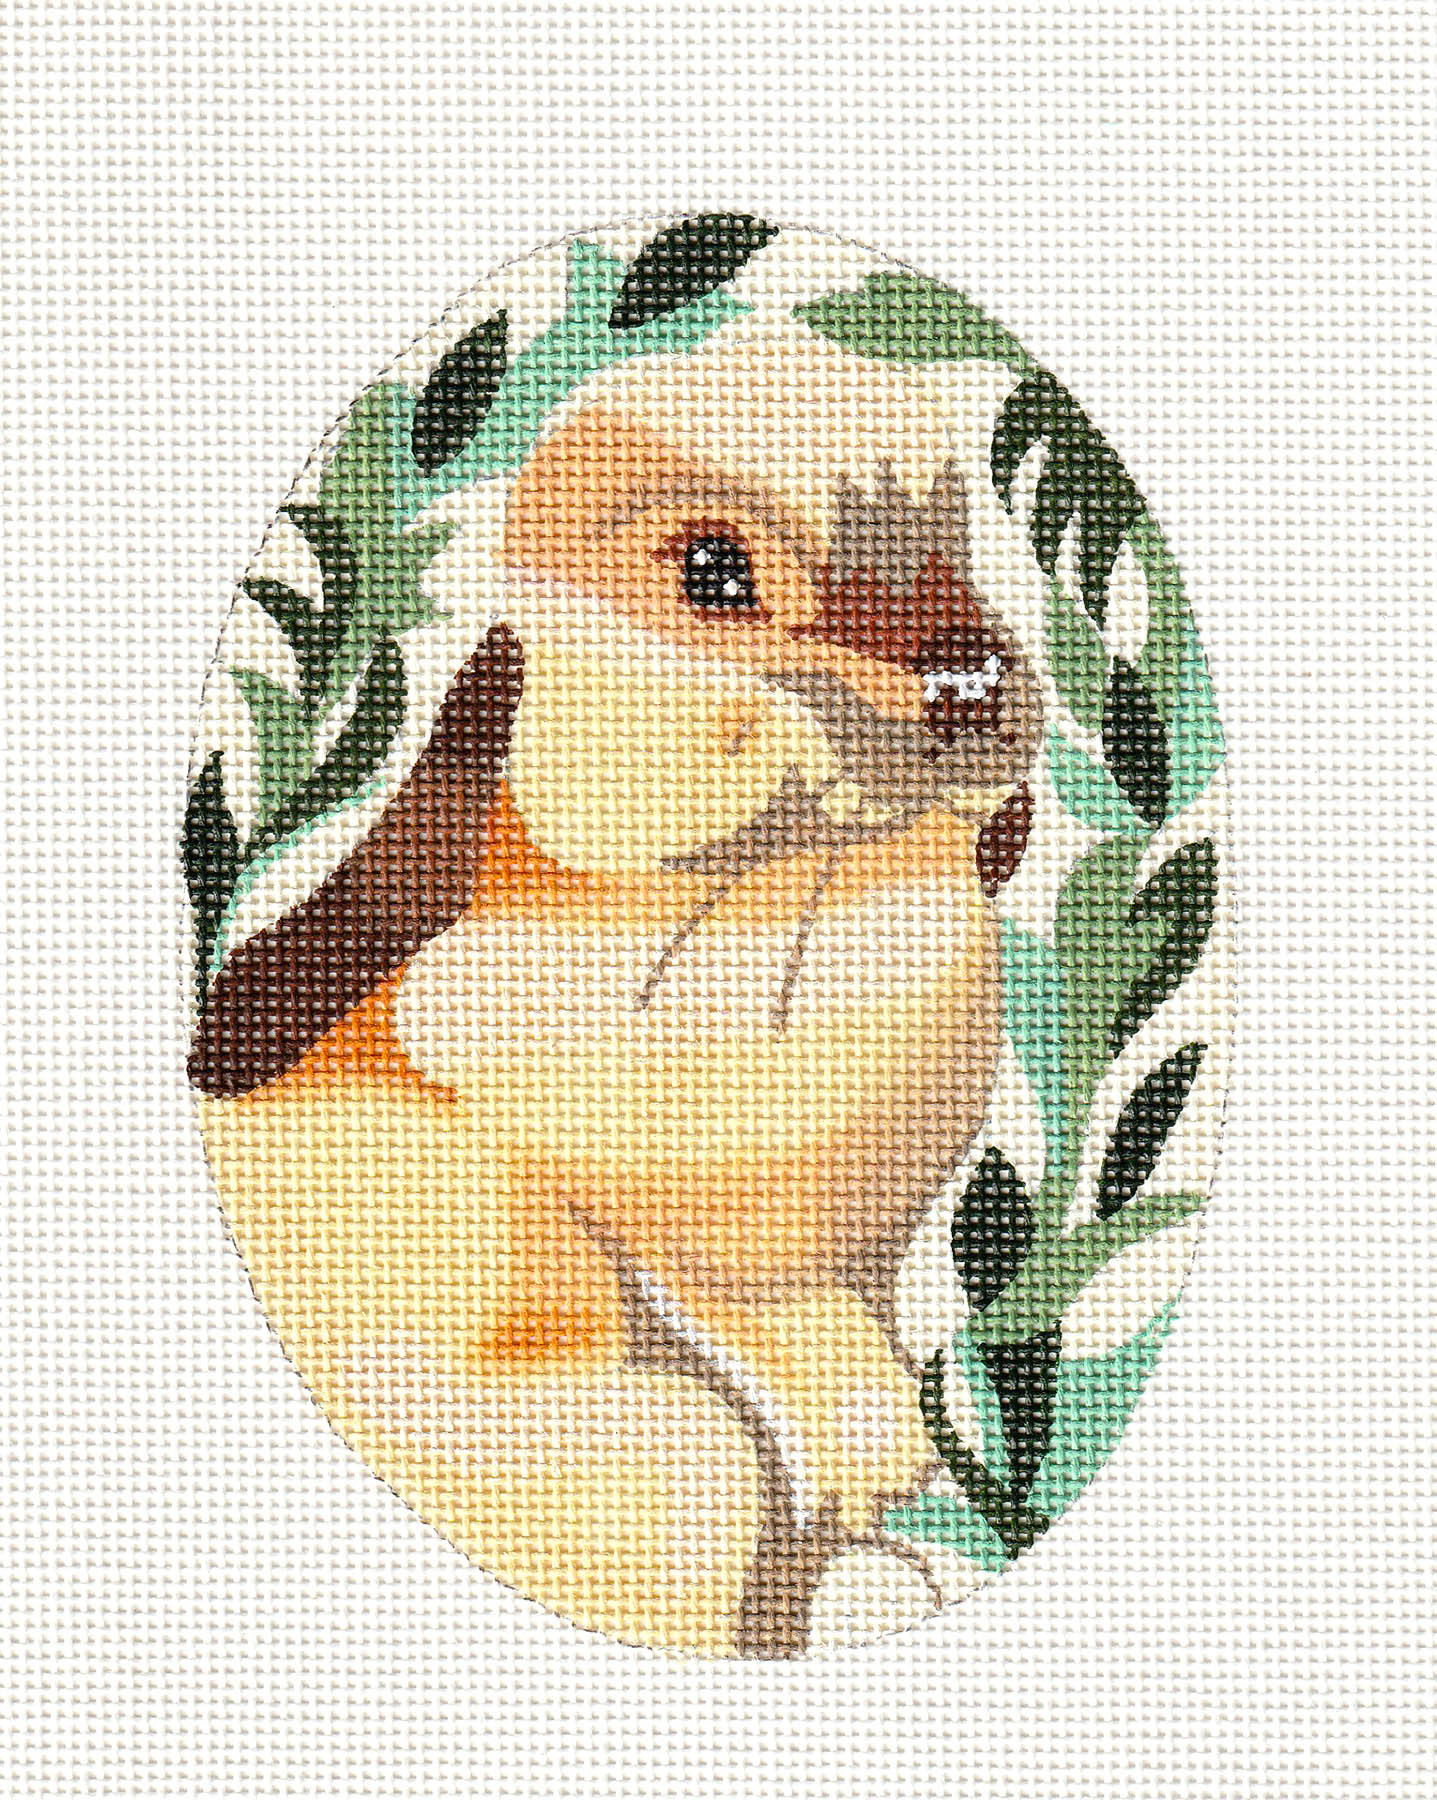 Canvas ~ Bunny Rabbit in Spring Greens handpainted Needlepoint Canvas by Melissa Prince